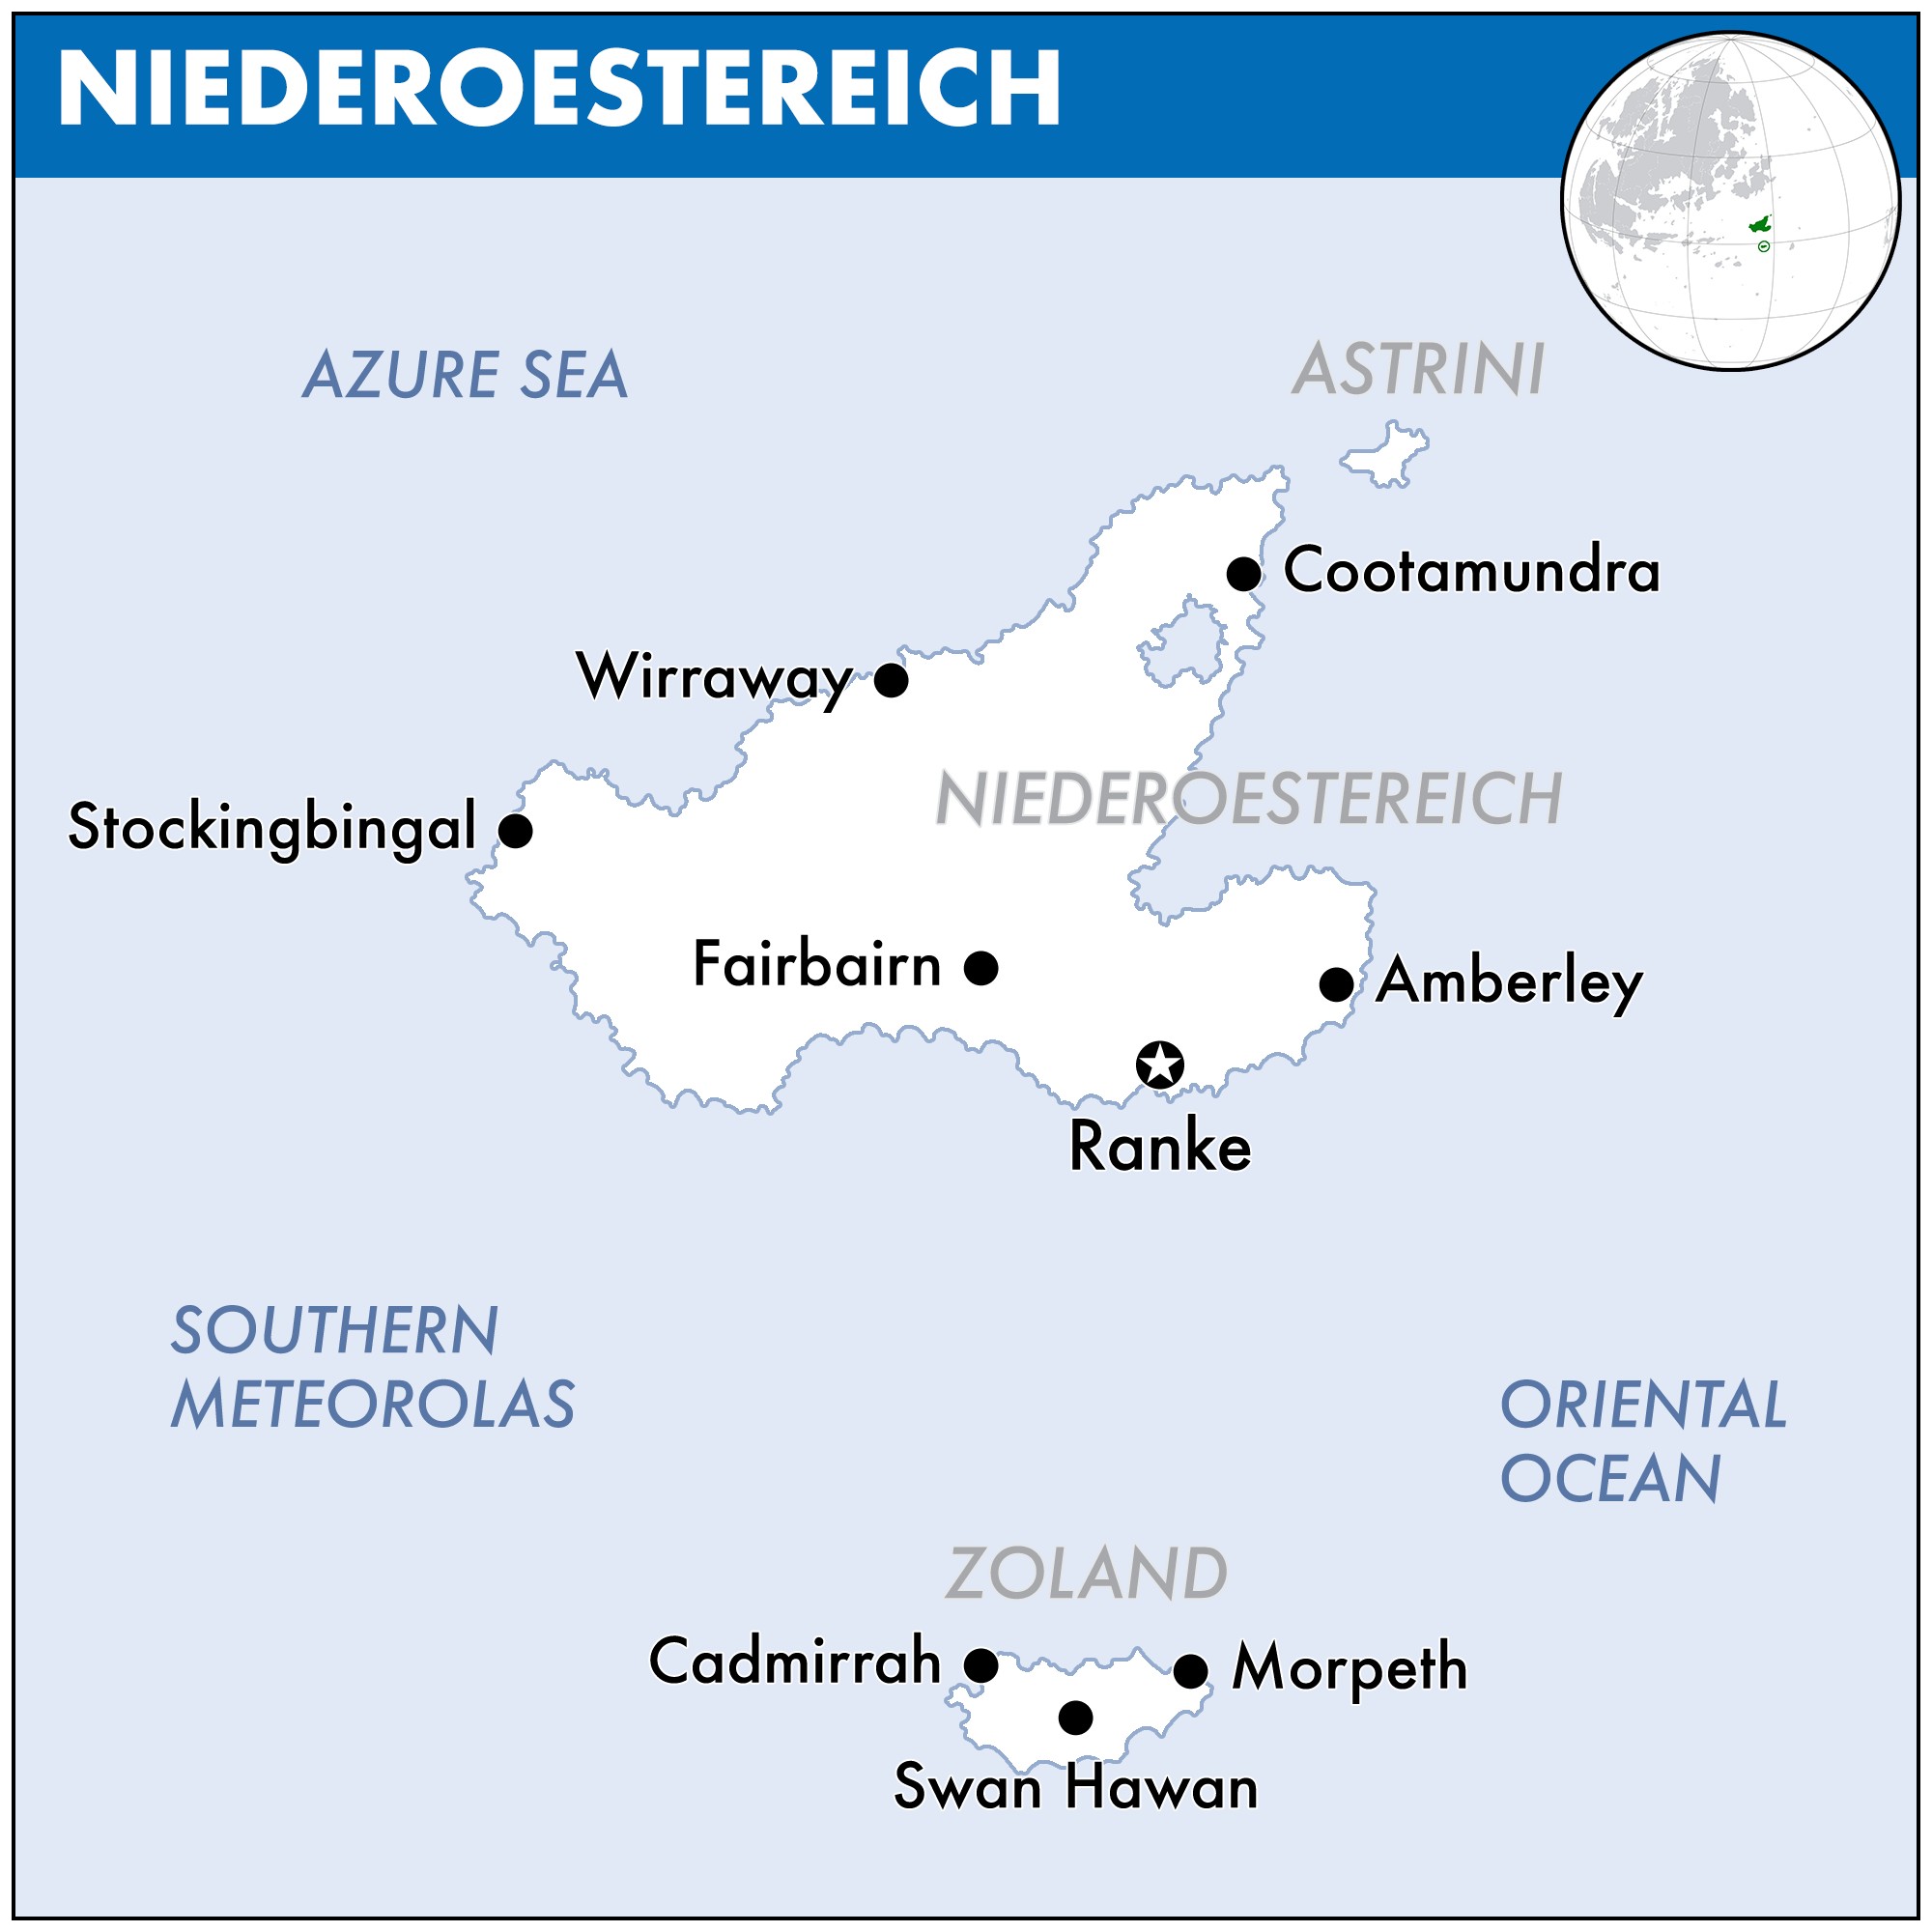 Map of Niederoestereich